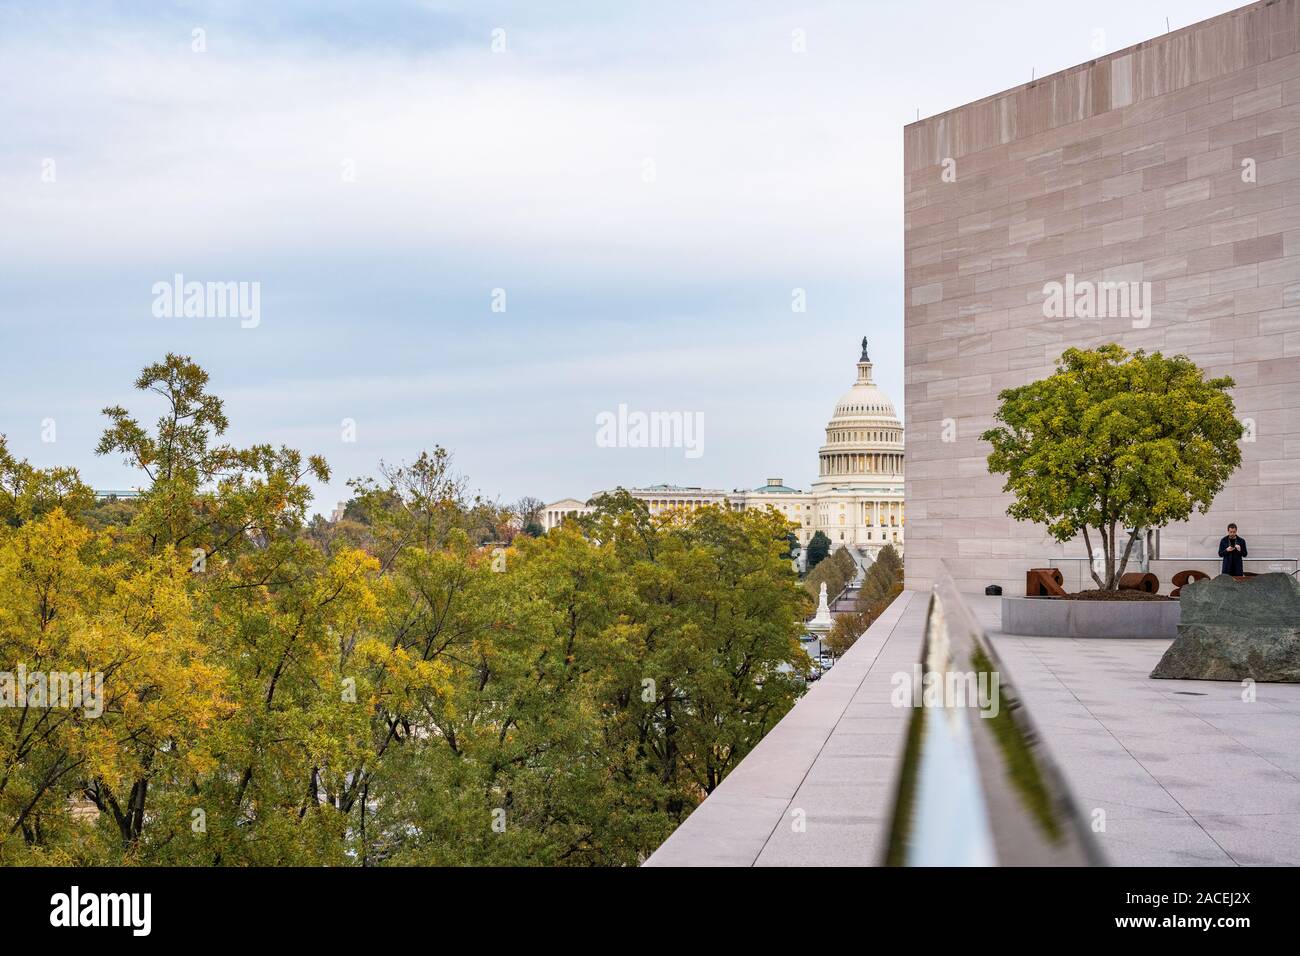 National Gallery of Art designed by I.M. Pei Stock Photo